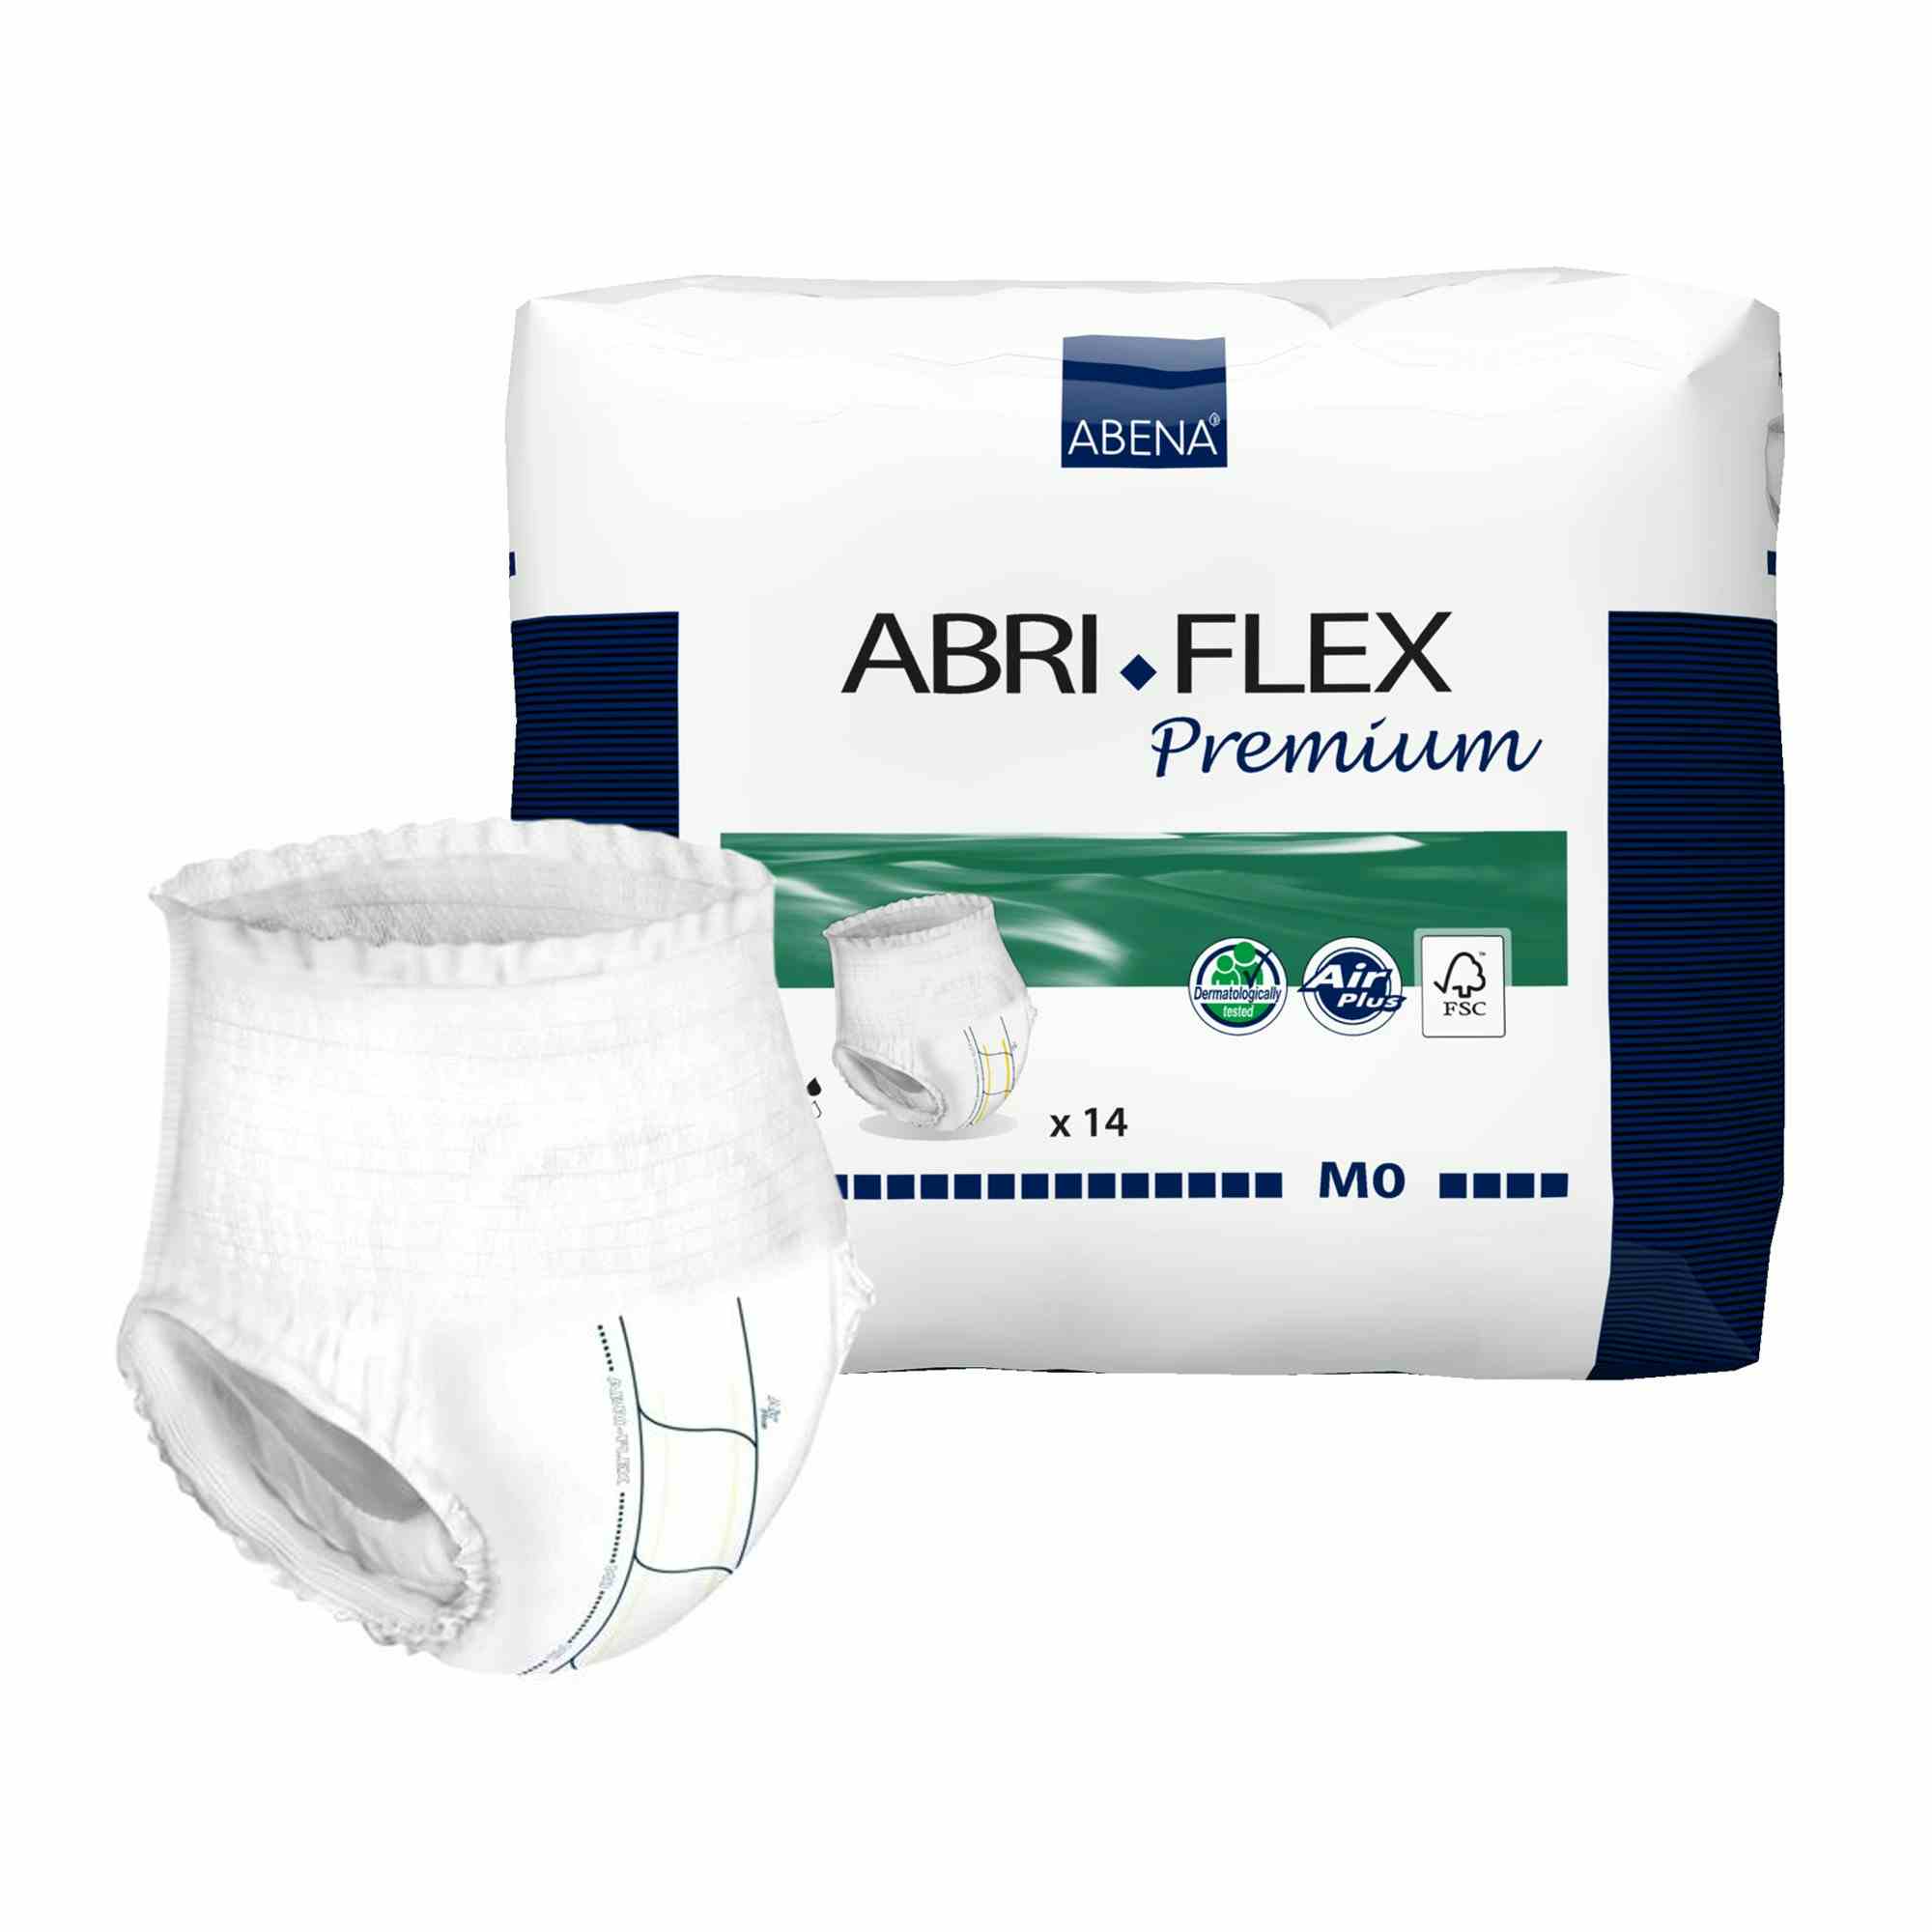 Abri-Flex M0 Unisex Adult Disposable Pull On Diaper with Tear Away Seams, Moderate Absorbency, 1000016665, Large (40-56") - Case of 84 Diapers (6 Bags)